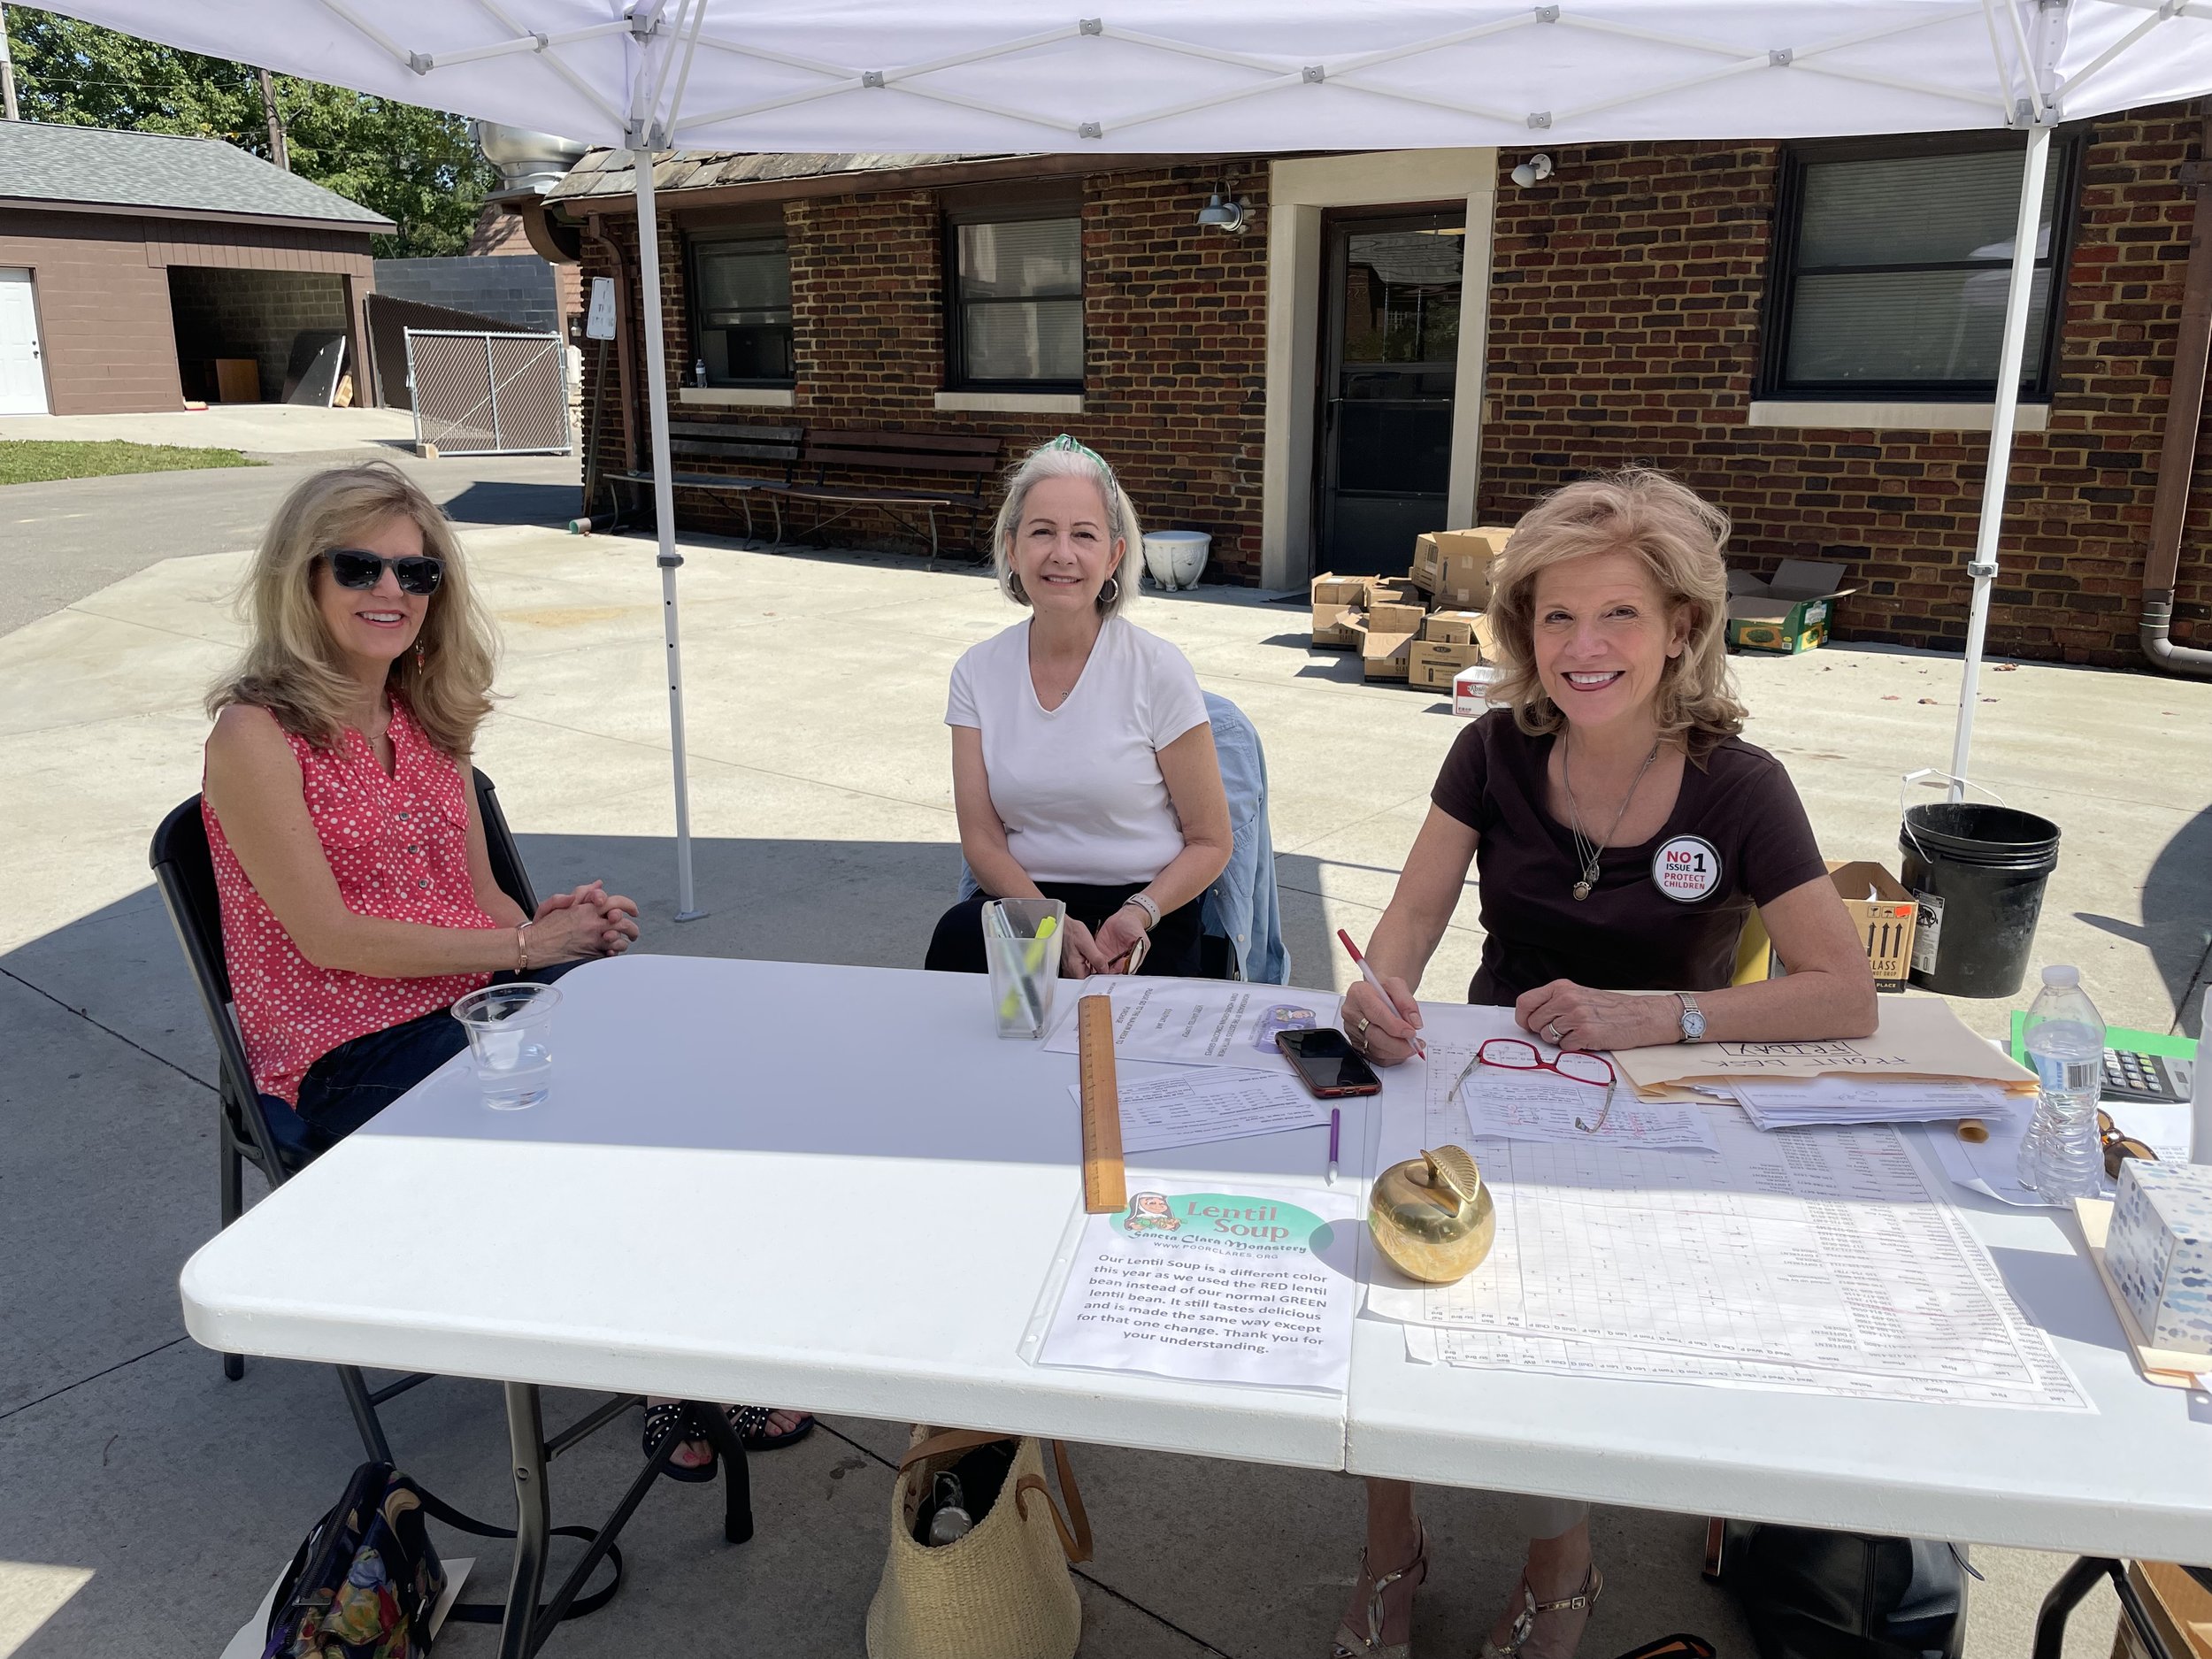  One of our “paid” side sets of volunteers taking a breather before another rush: Nancy, Marsha, and Janet. 